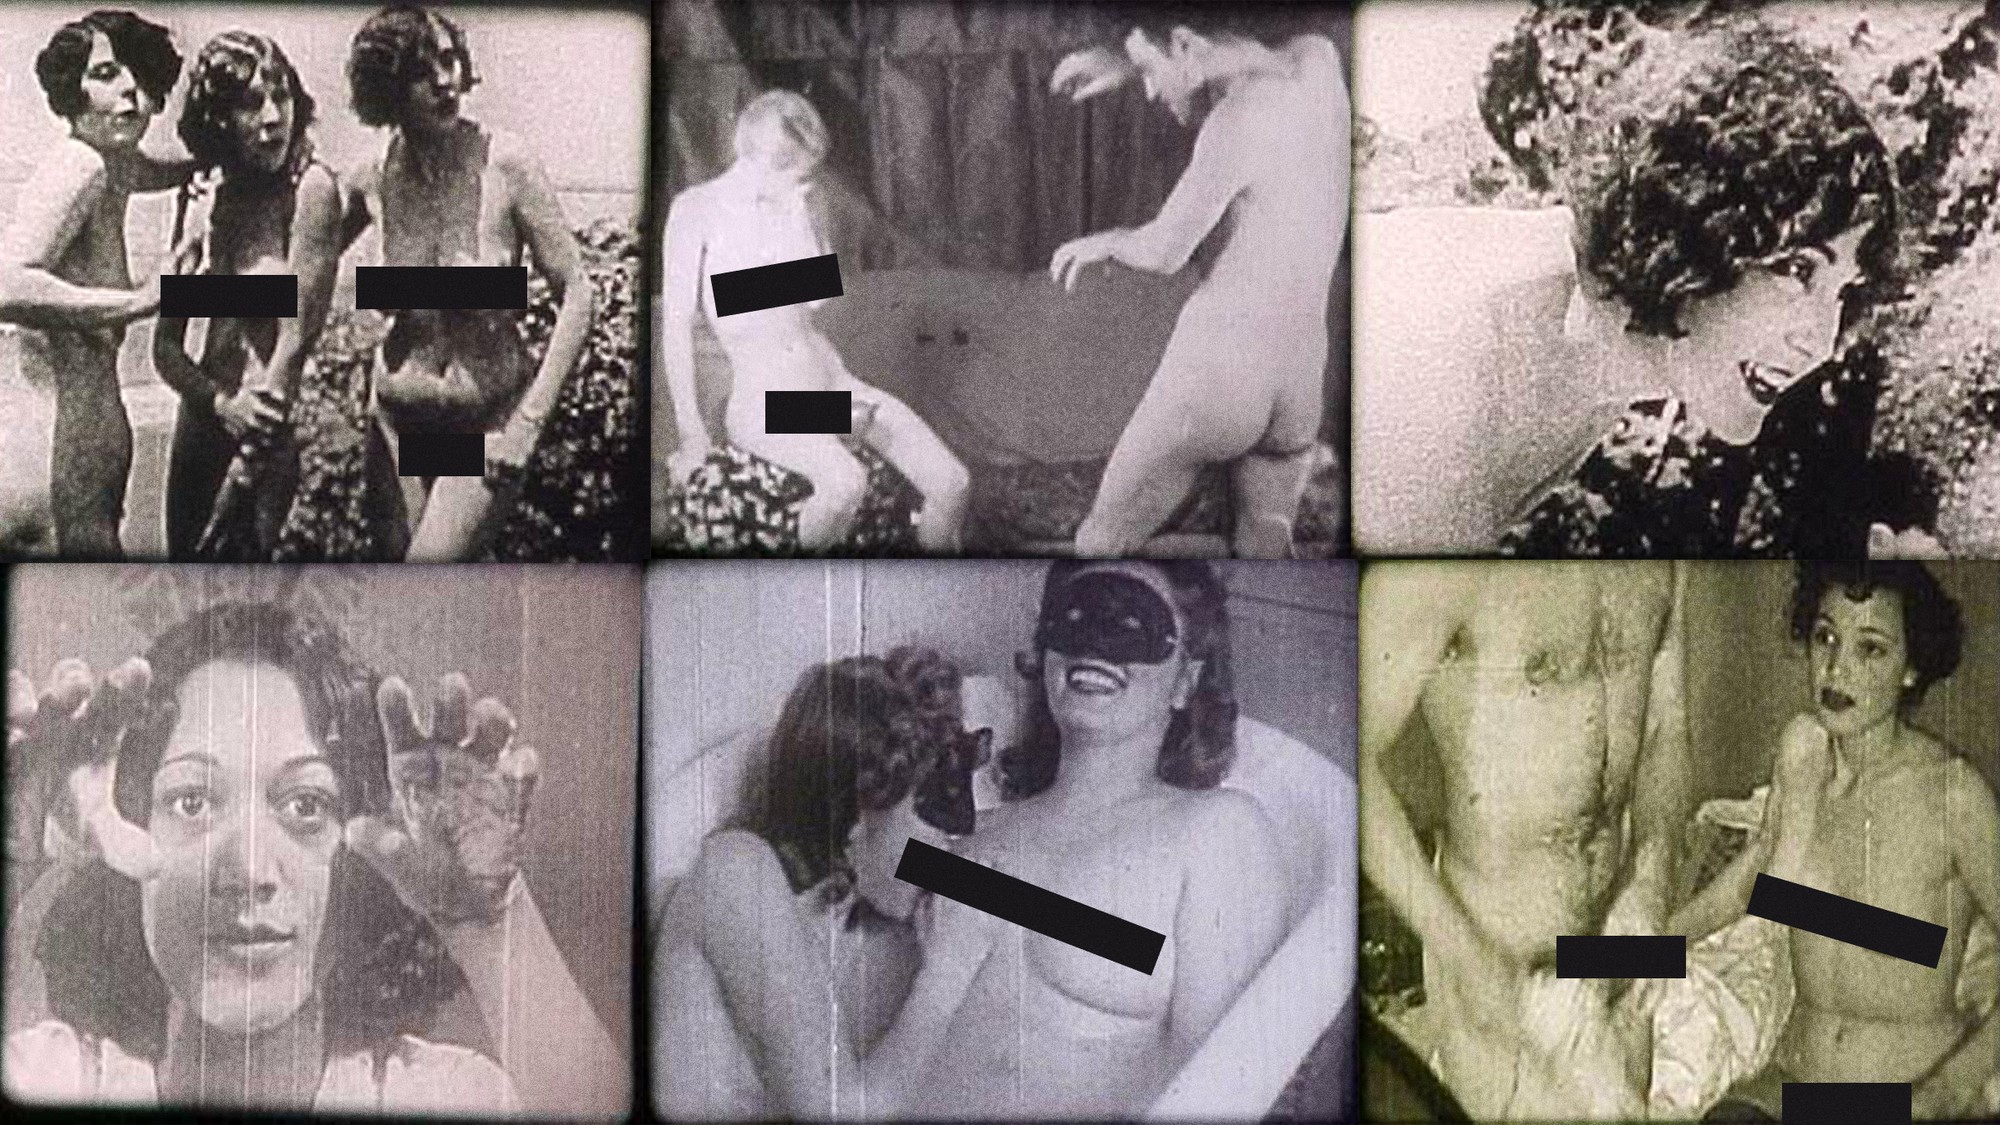 Porn from the 1920s Was More Wild and Hardcore Than You ...